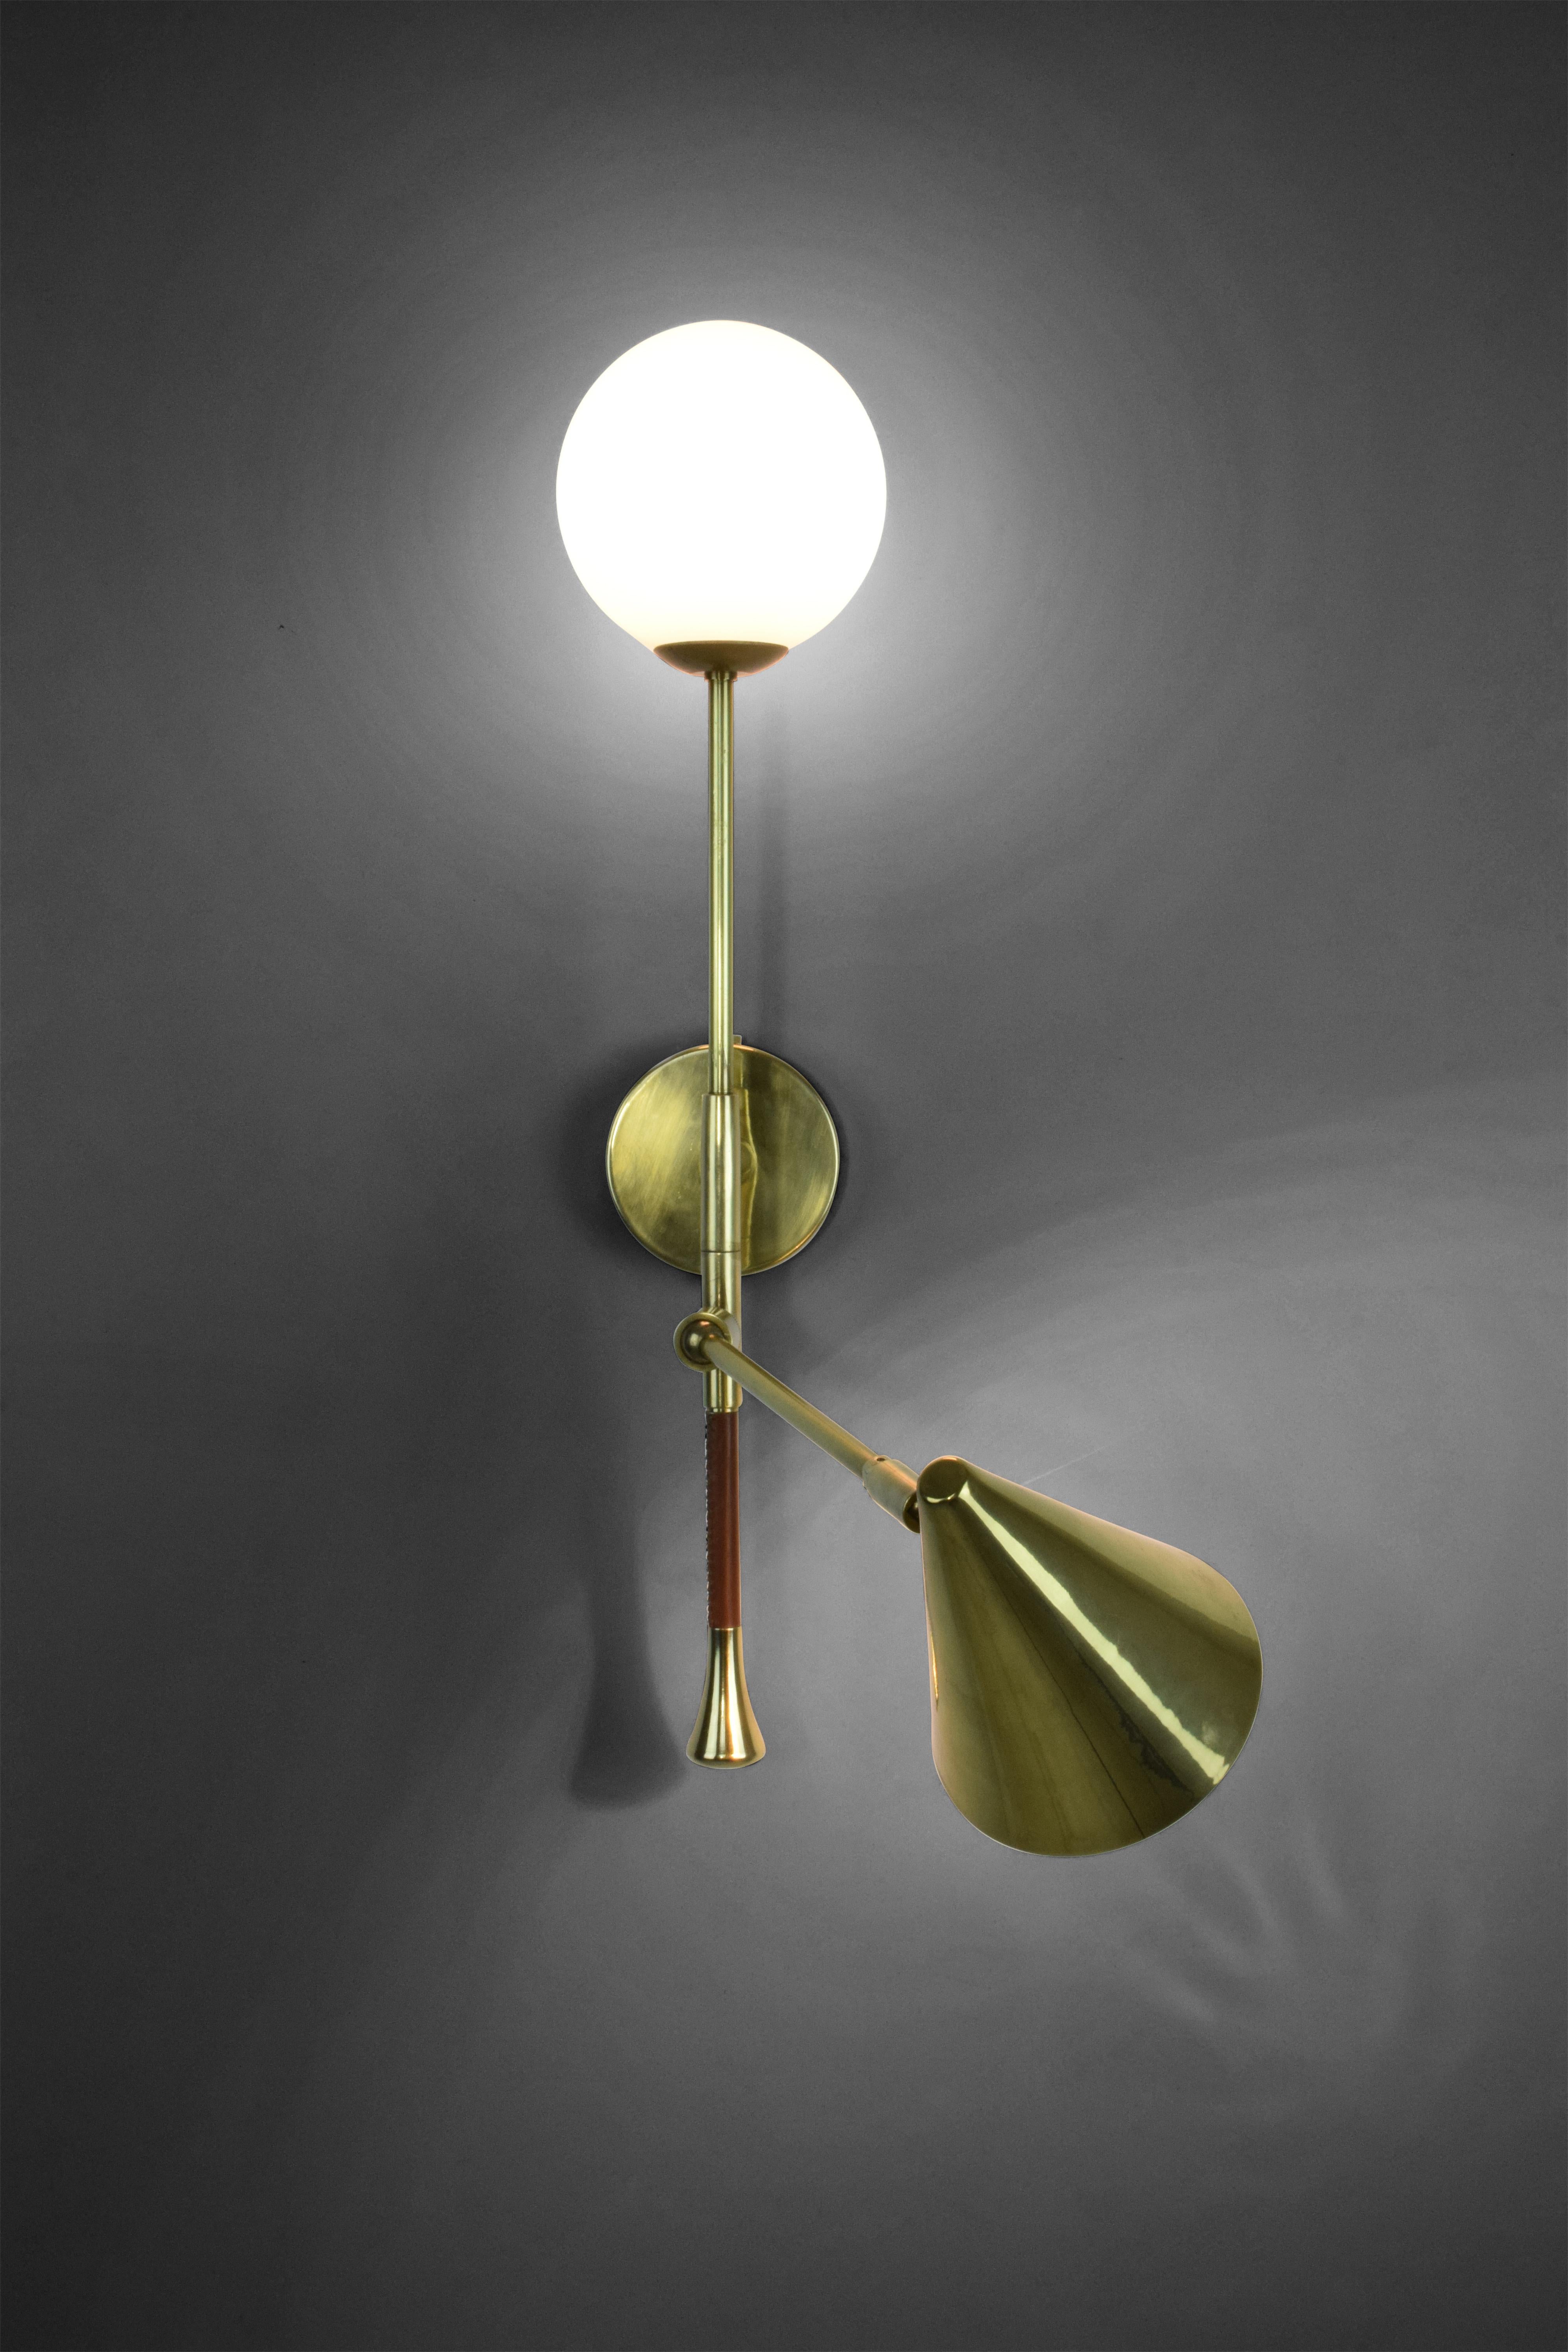 The DE.LIGHT is a solid brass double wall light with a leather sheathed stem detail. The main structure tops an opal glass di user or a cylinder fabric shade and the directional stem features a conic shade mounted with a moveable joint. Perfect as a